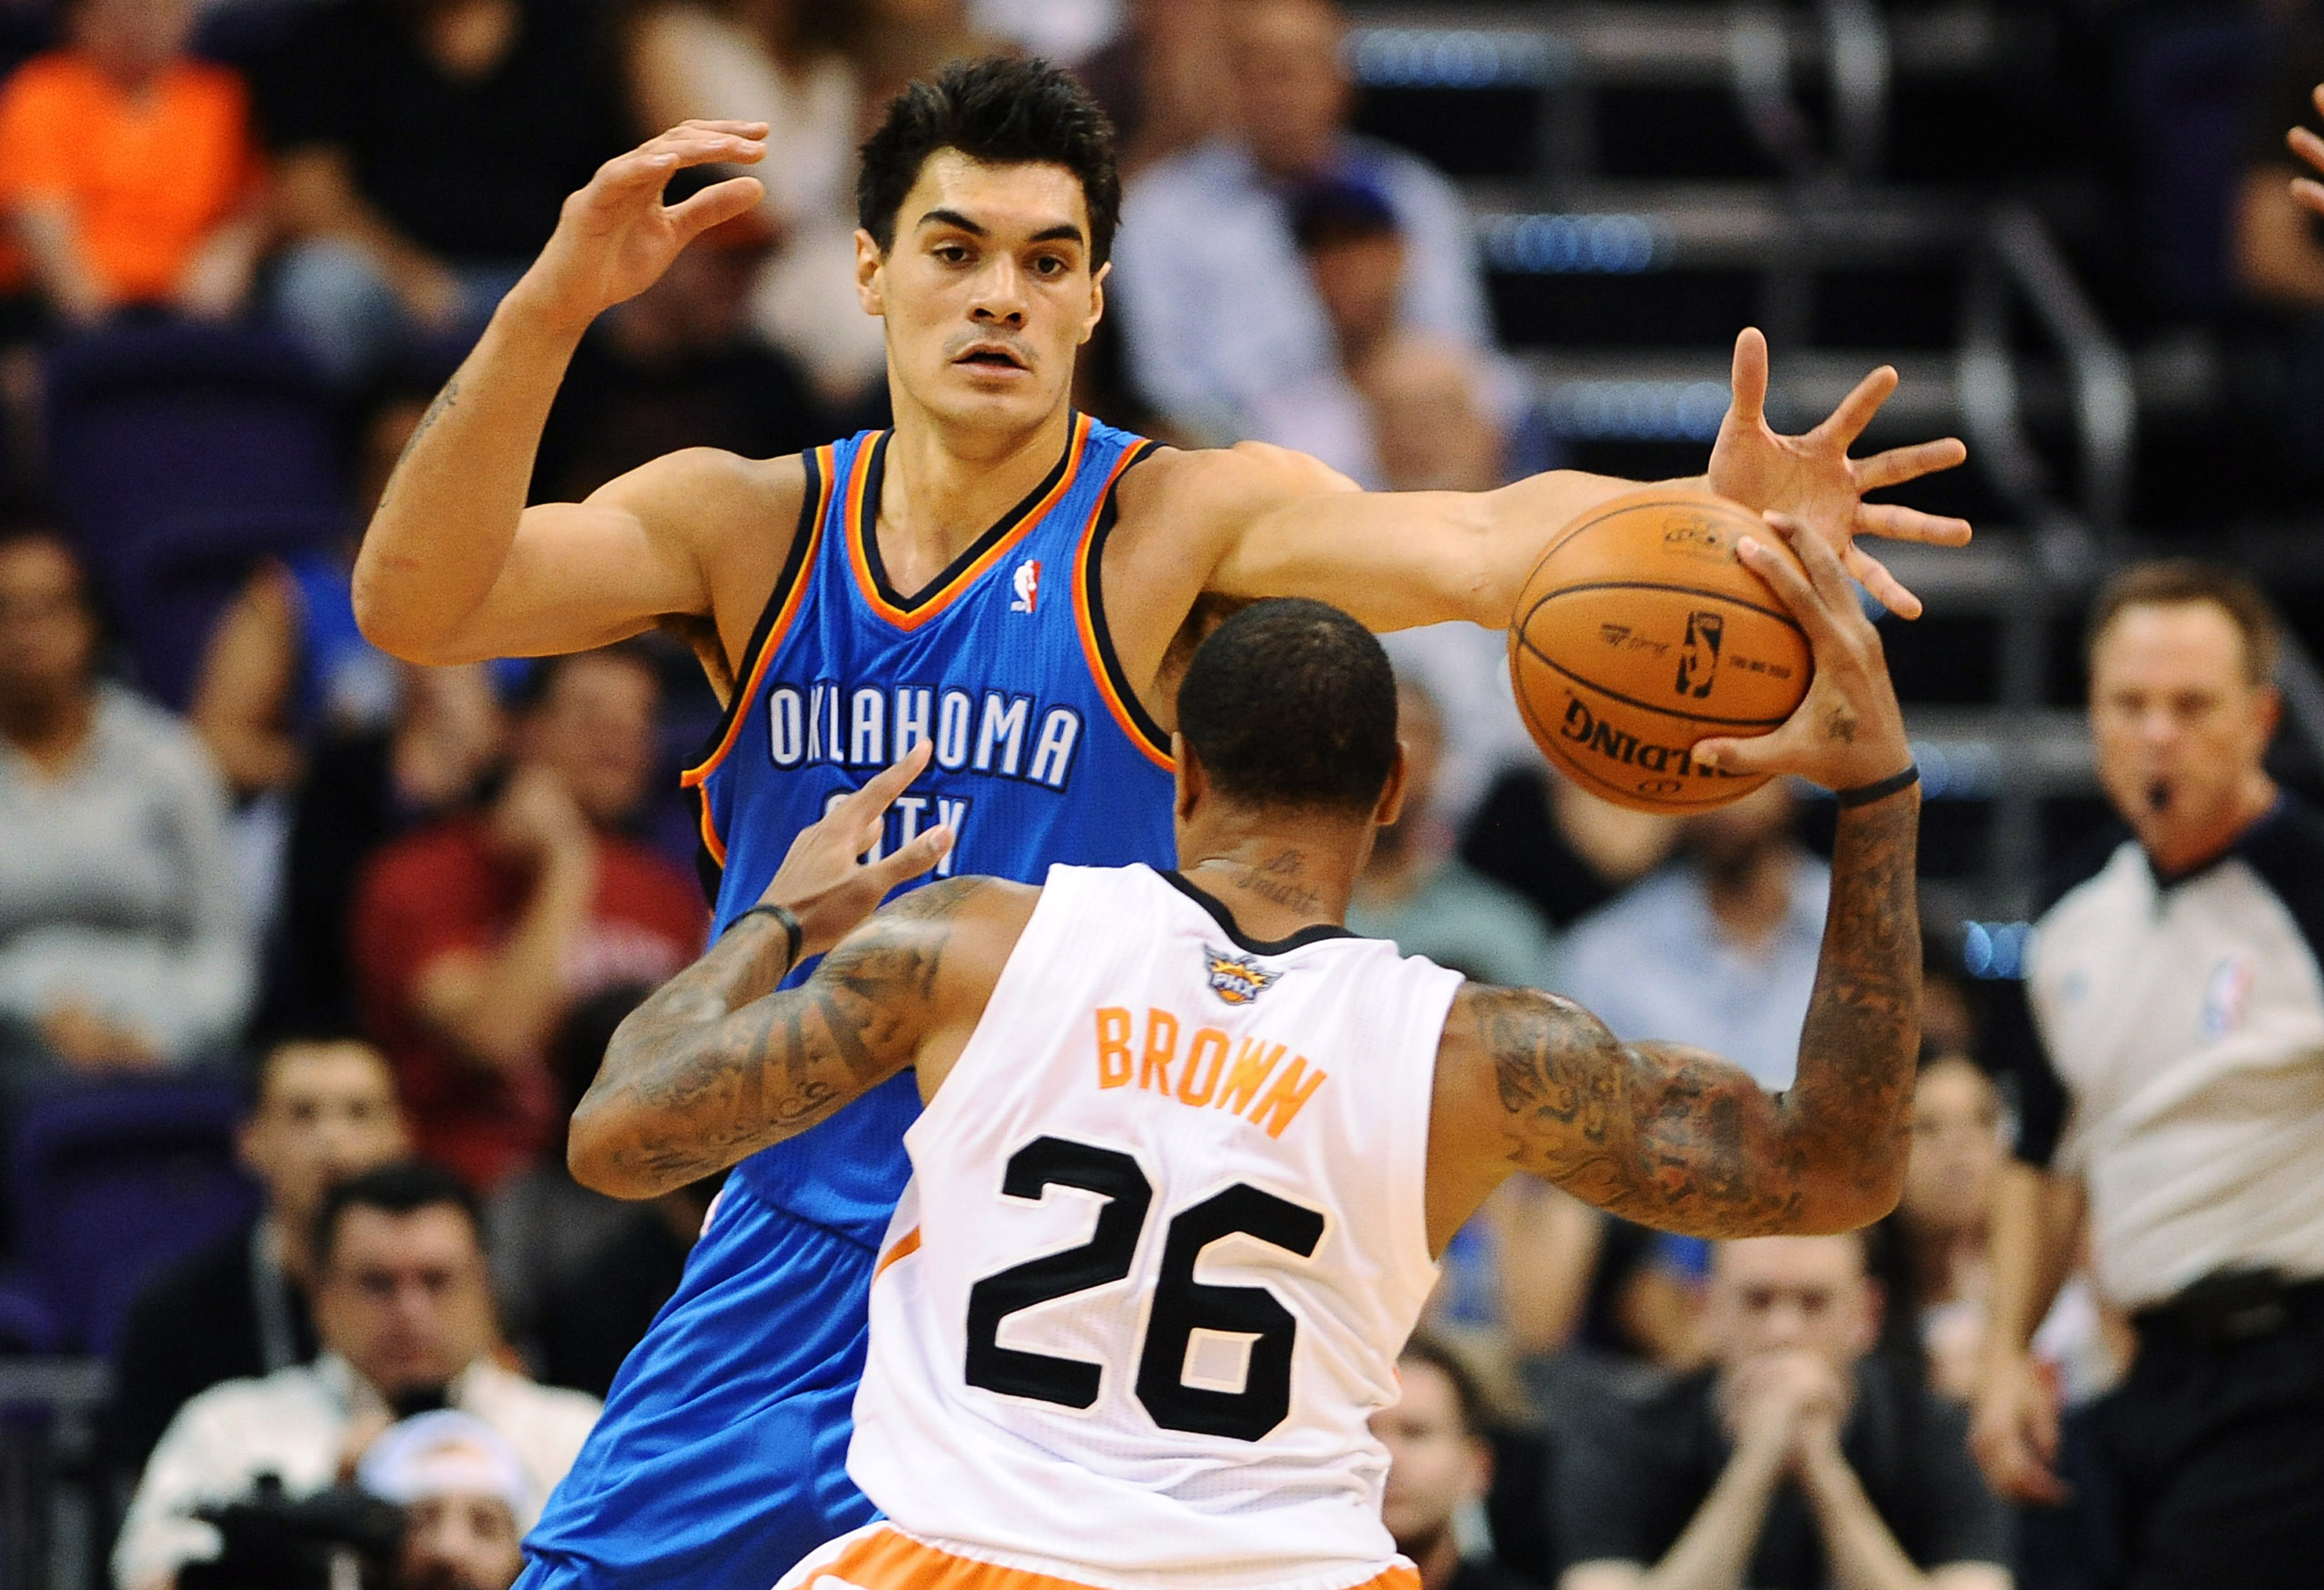 Steven Adams has worked himself from D-League rookie to bench player with the Oklahoma City Thunder. What kind of production is expected from the 20 year-old during the season?